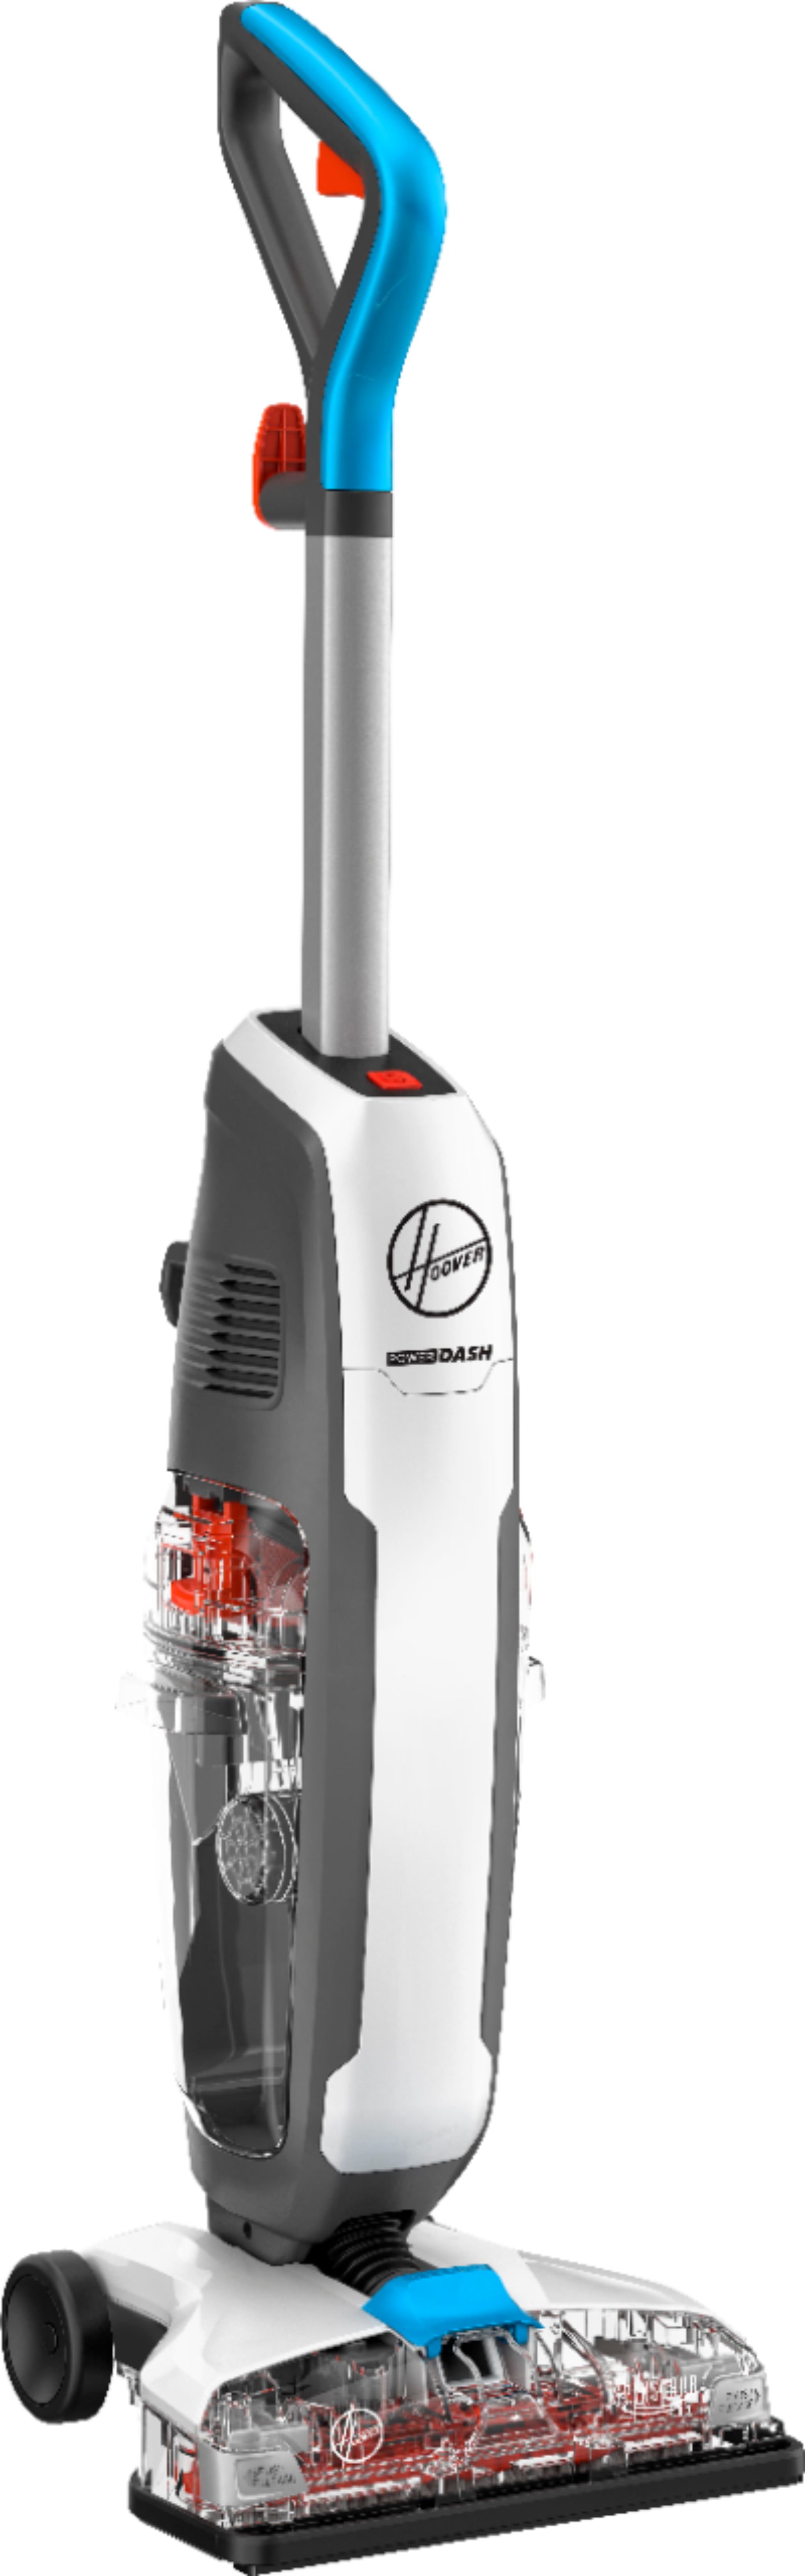 Hoover Floor Cleaner at